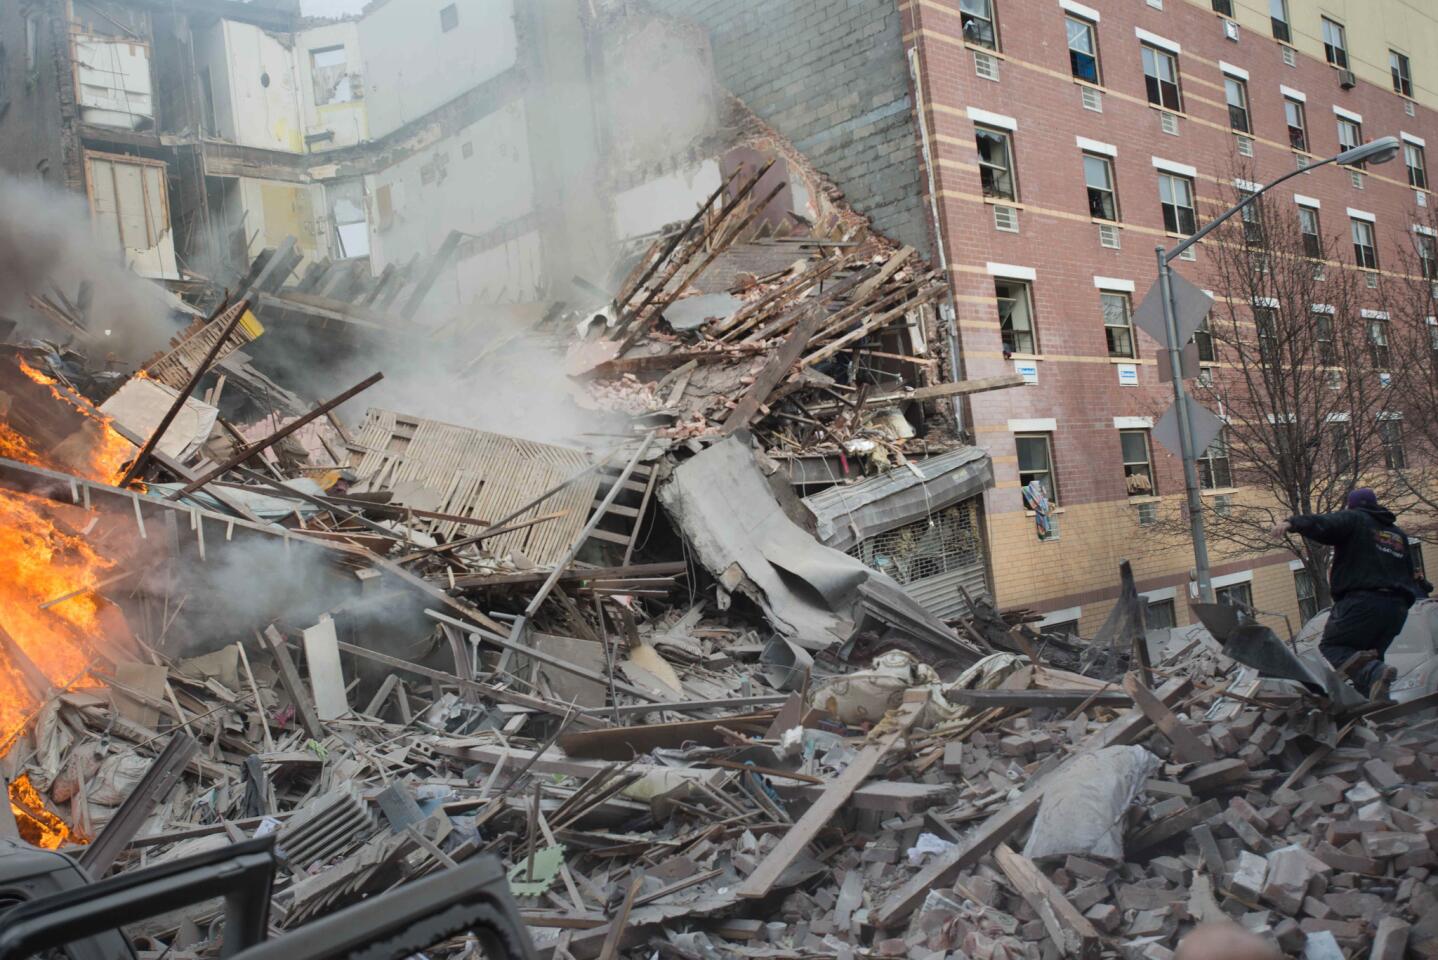 Emergency workers respond to the scene of an explosion and building collapse in the East Harlem neighborhood of New York on Wednesday. The explosion leveled an apartment building, and sent flames and billowing black smoke above the skyline.